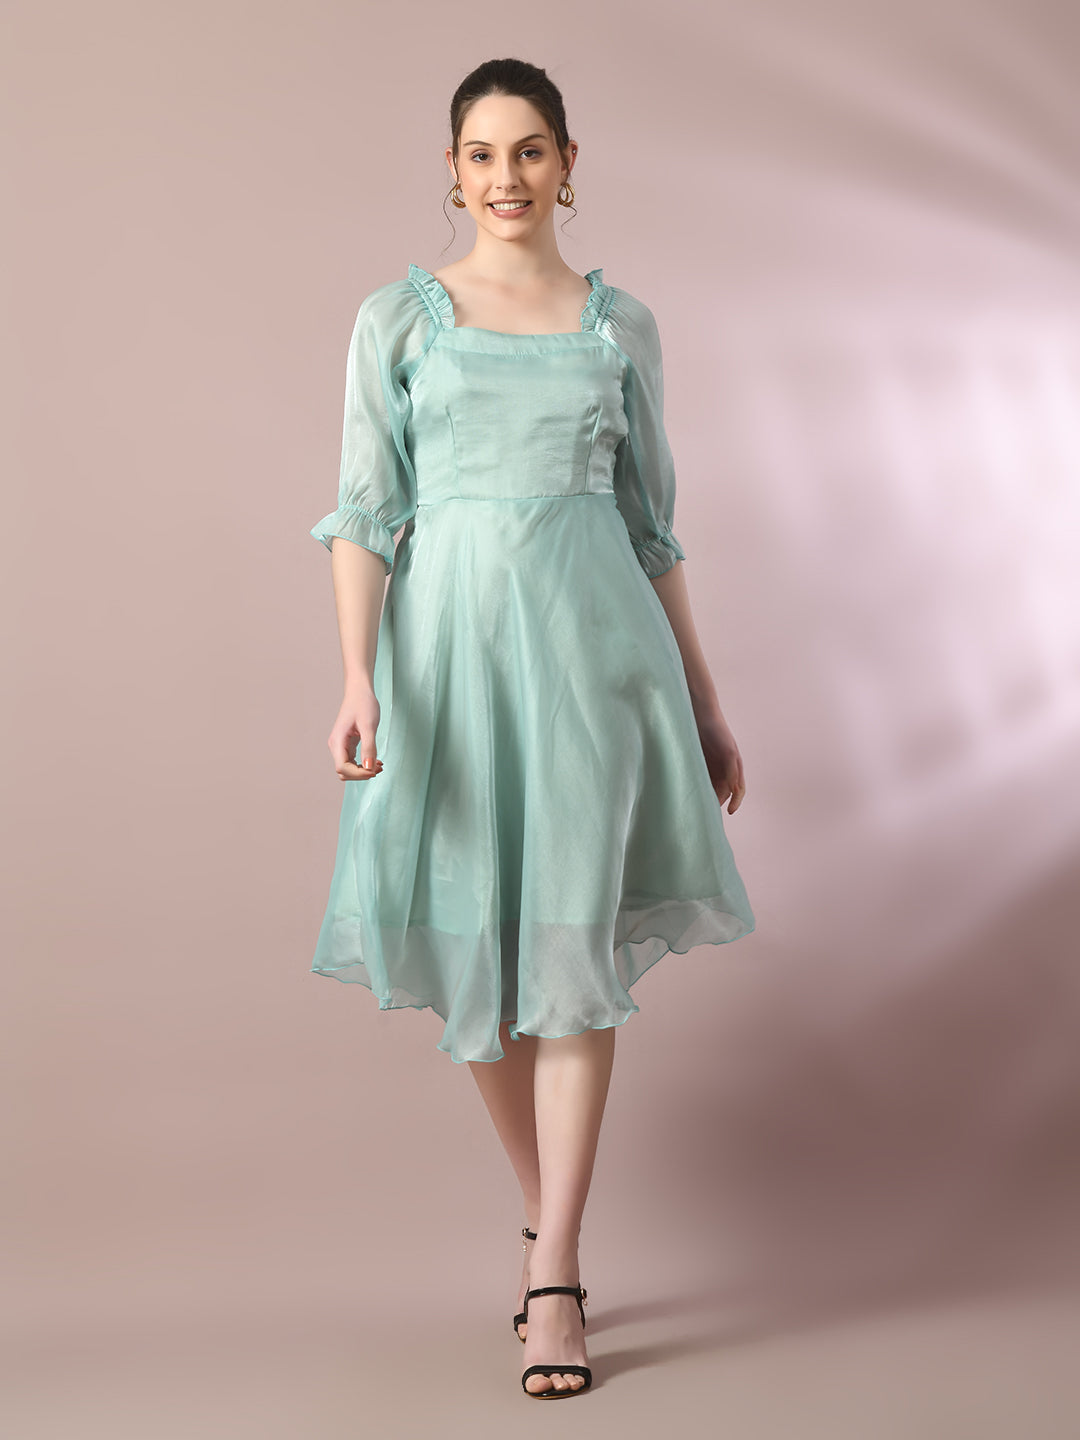 Women's  Sea Green Solid Square Neck Fit And Flare Party Dress  - Myshka